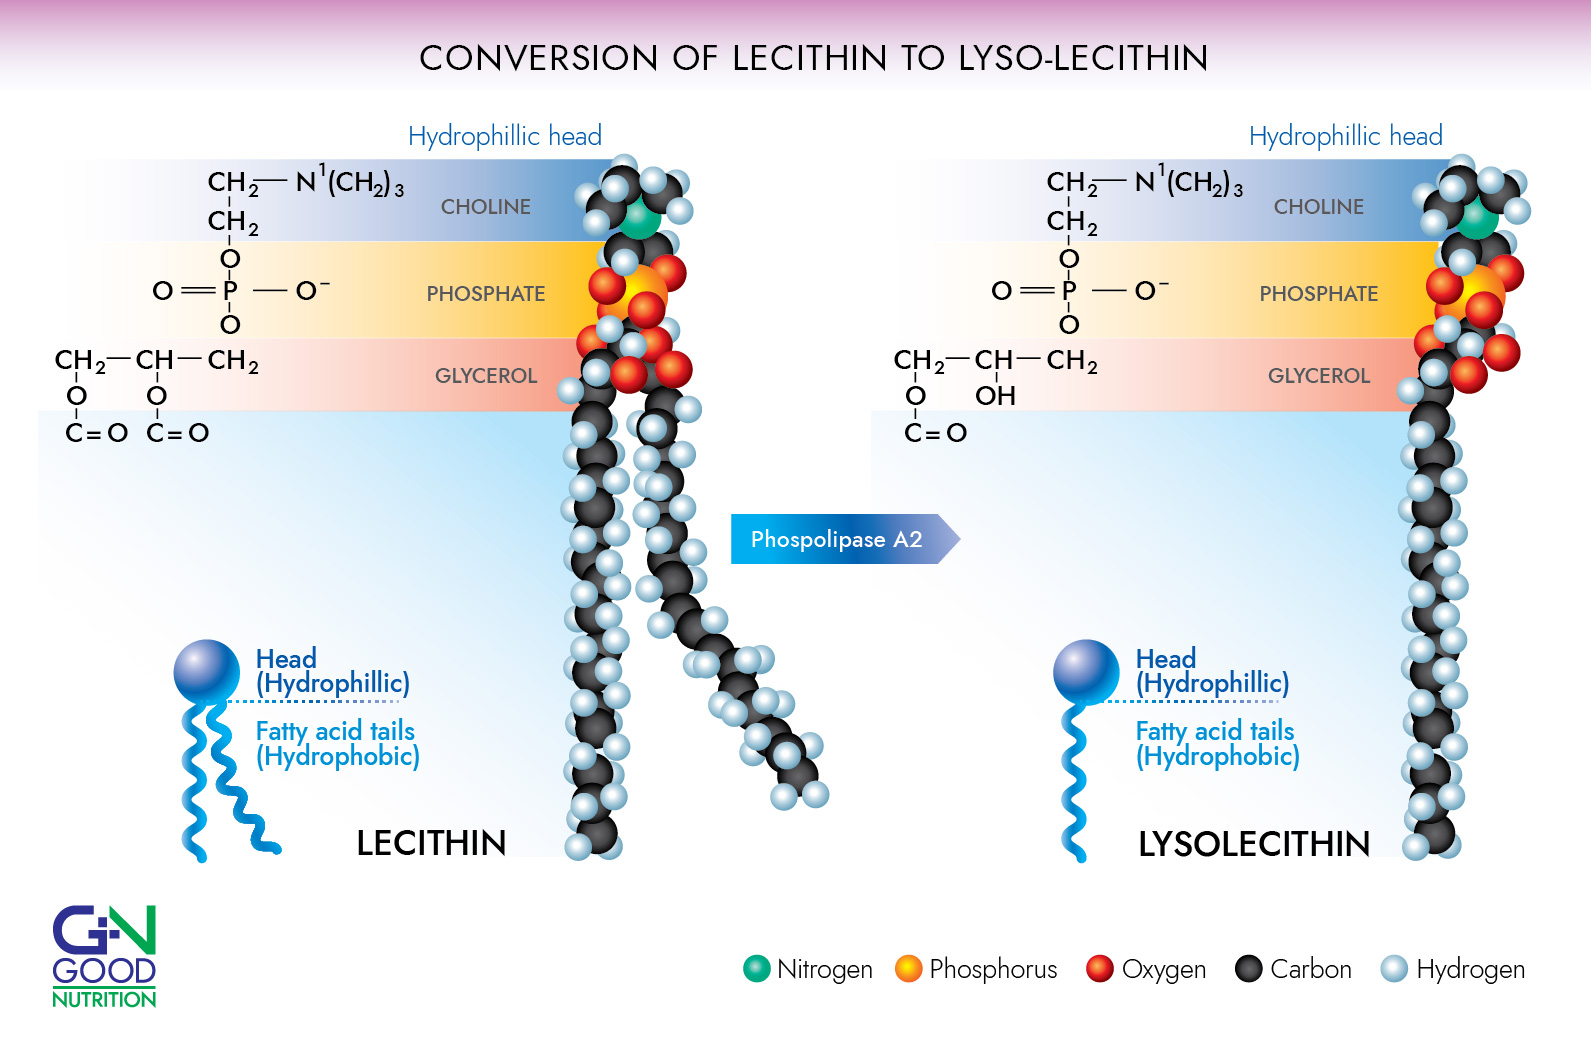 lecithin hydrolysis to lysolecithin, lysolecithin one less fatty acid leg